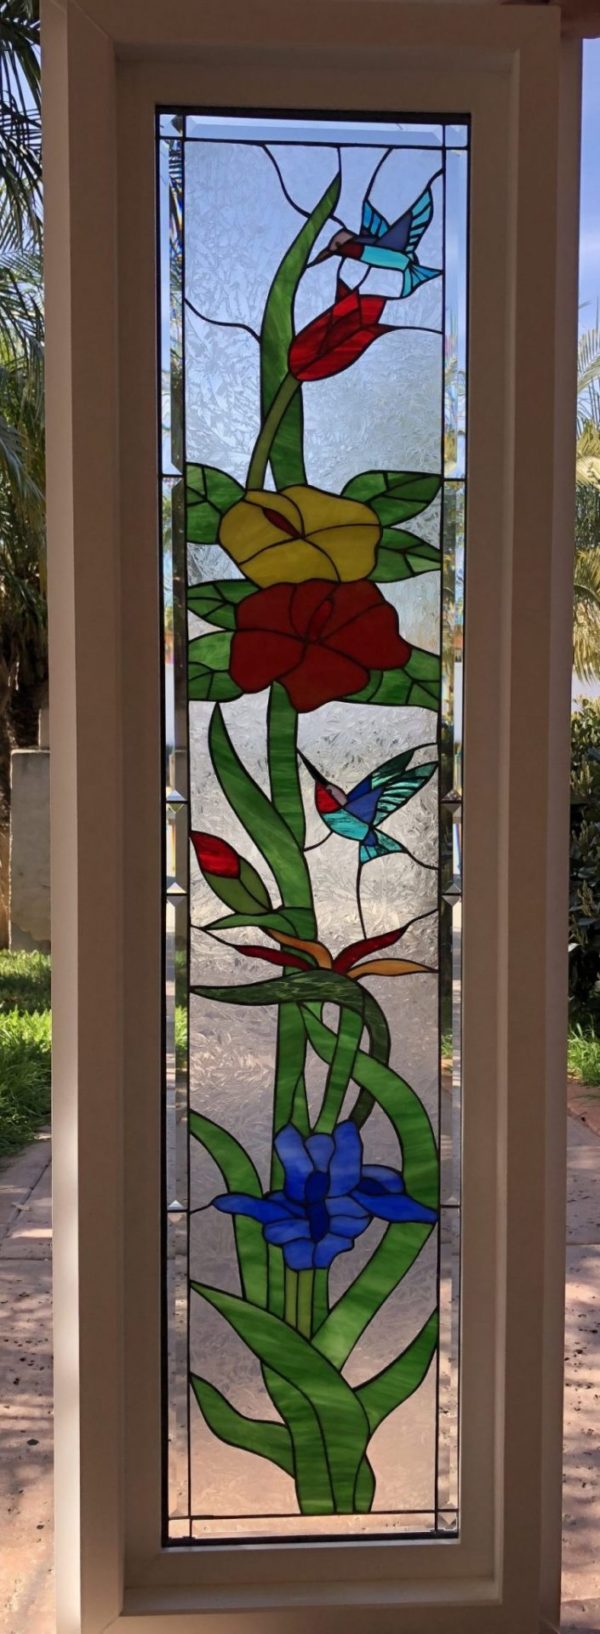 Vinyl Framed and Tempered Glass Insulated!! The "Hummingbird Garden Sidelite" Stained Glass Window